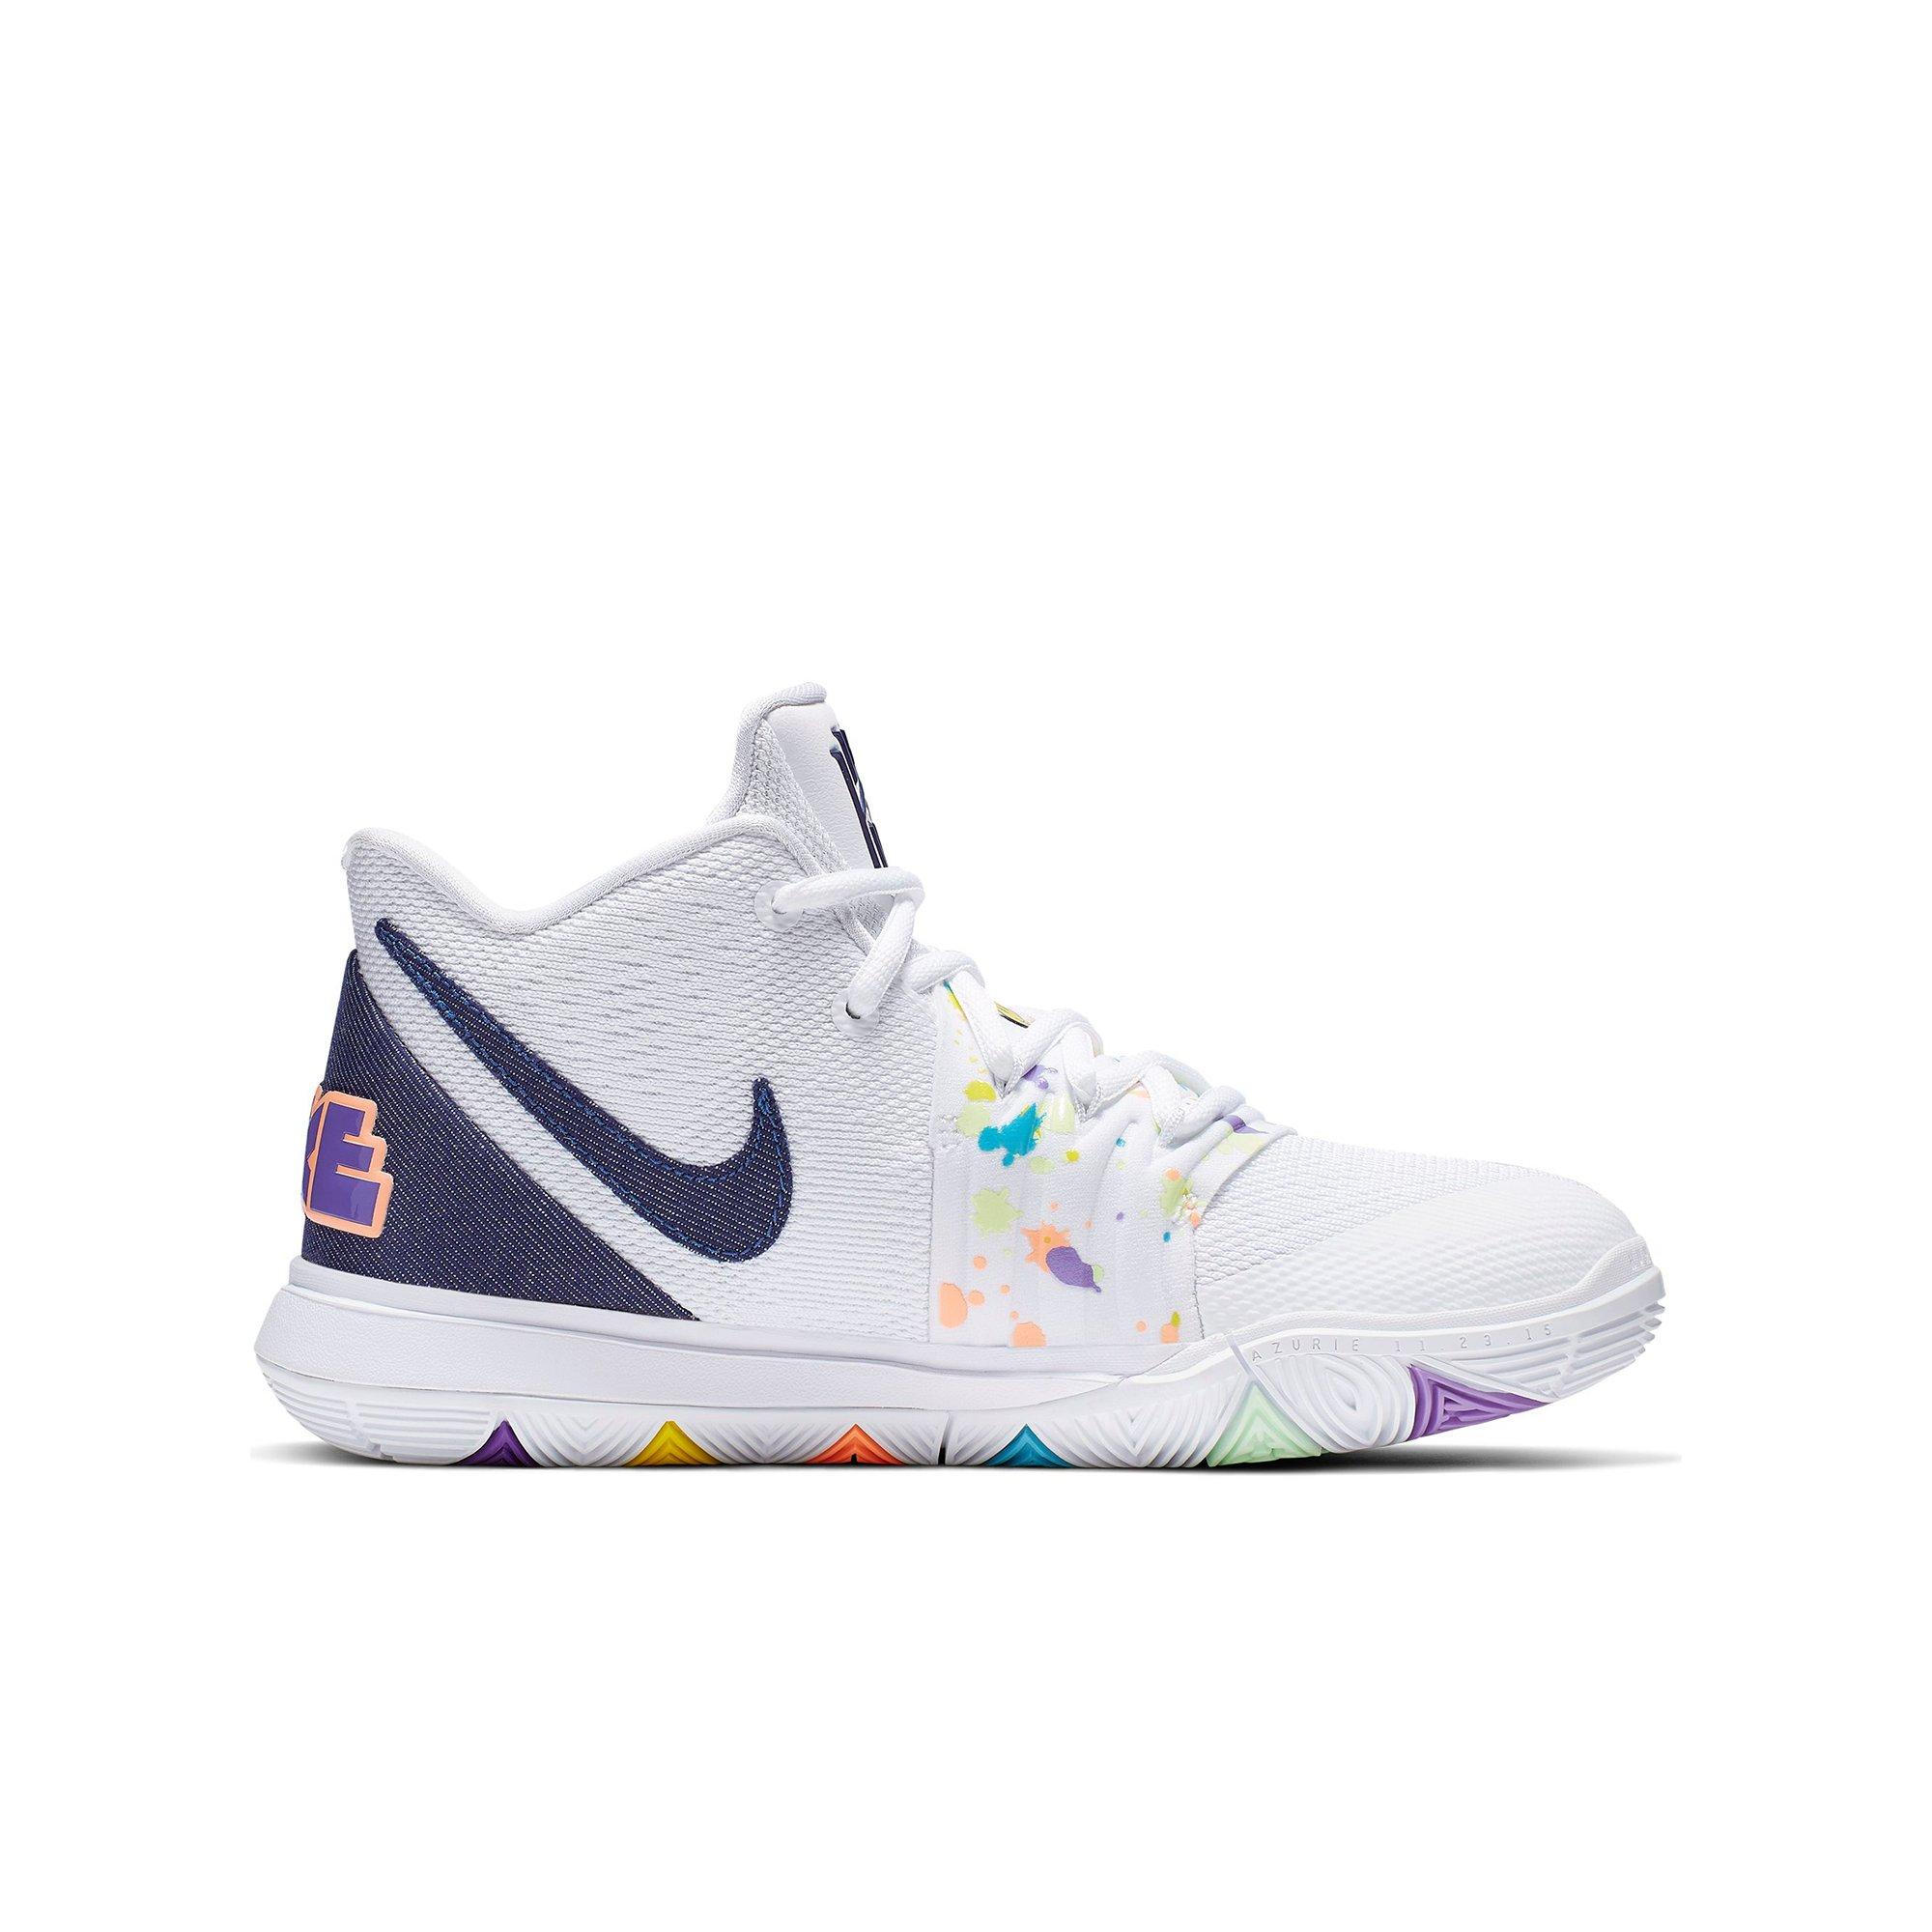 Nike Kyrie 5 Have A Nike Day AO2918 101 Store List